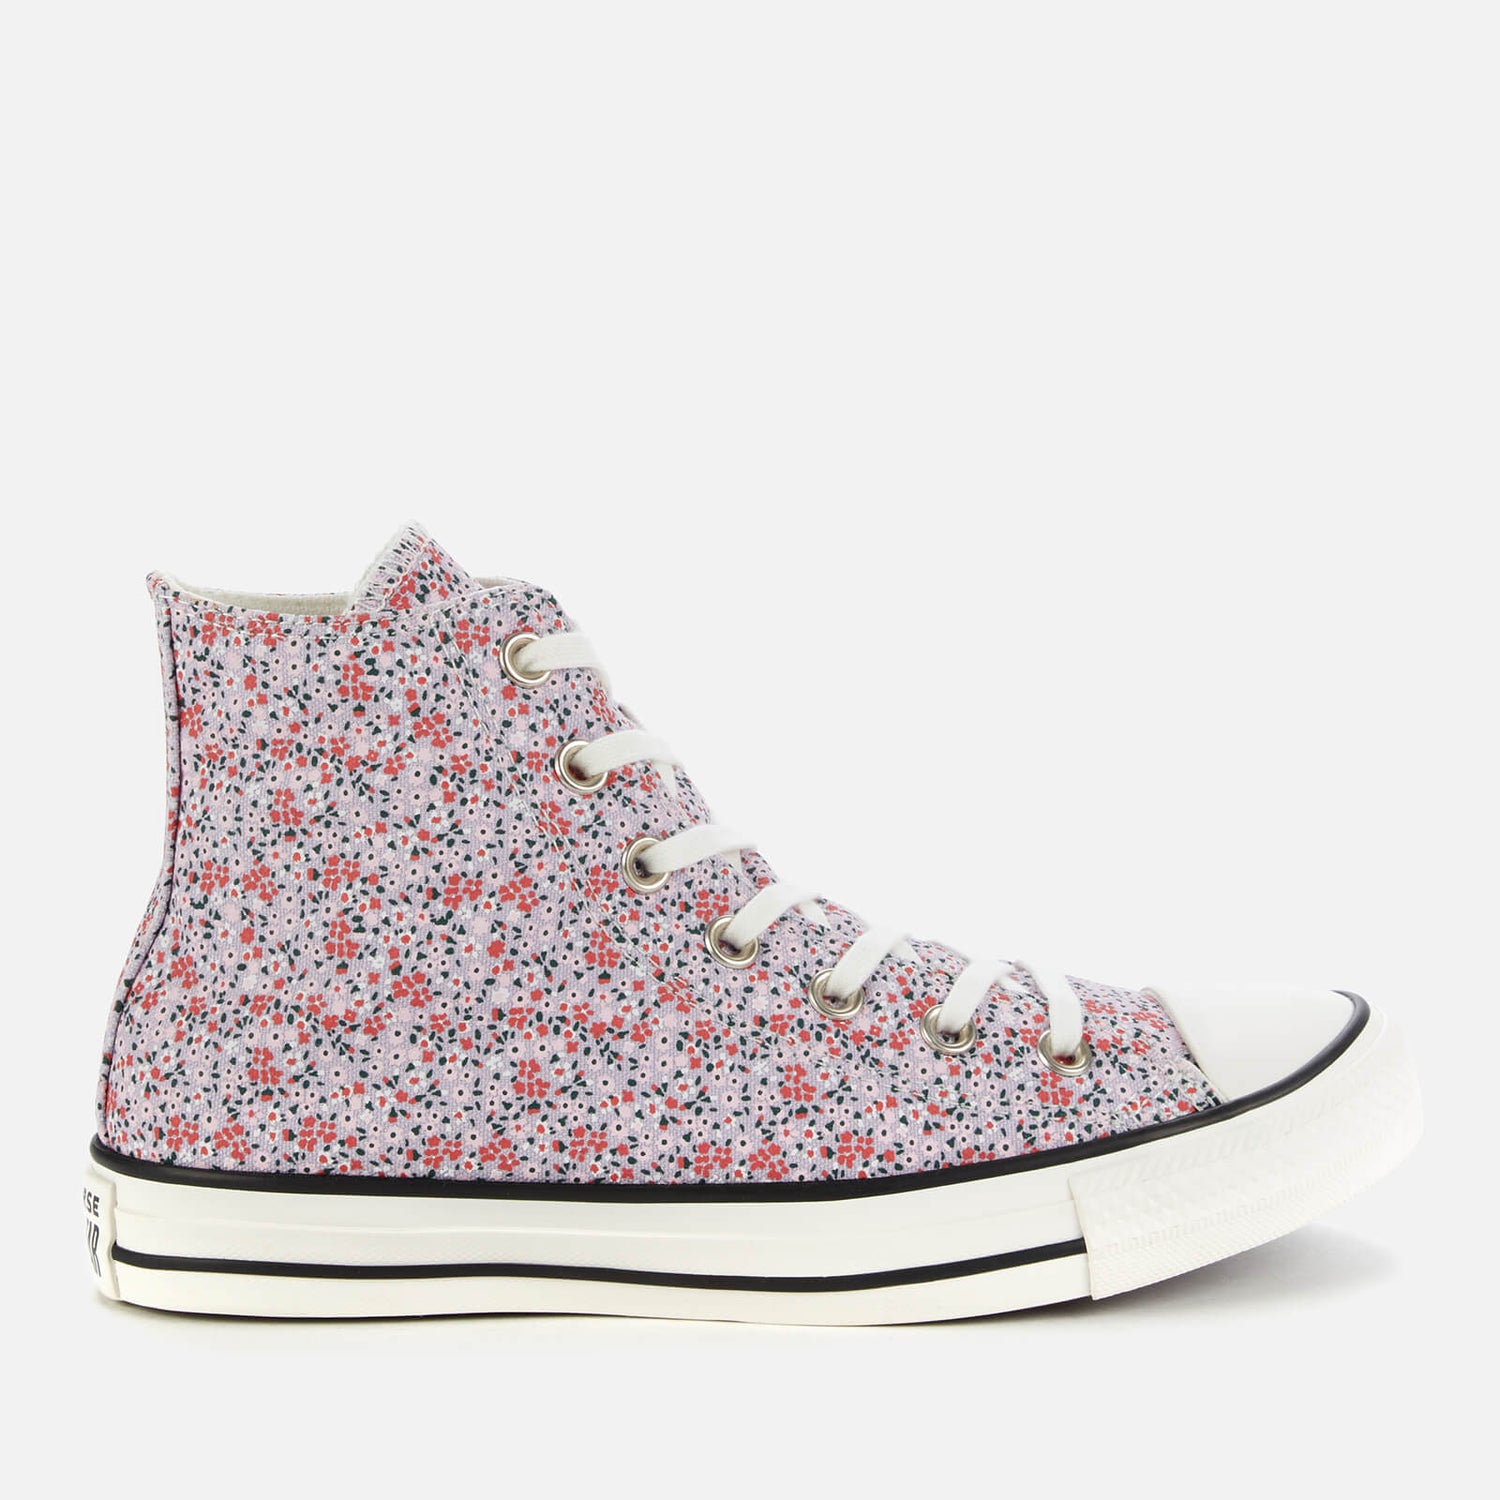 Converse Women's Chuck Taylor All Star Hi-Top Trainers - Vintage White/Pink Foam